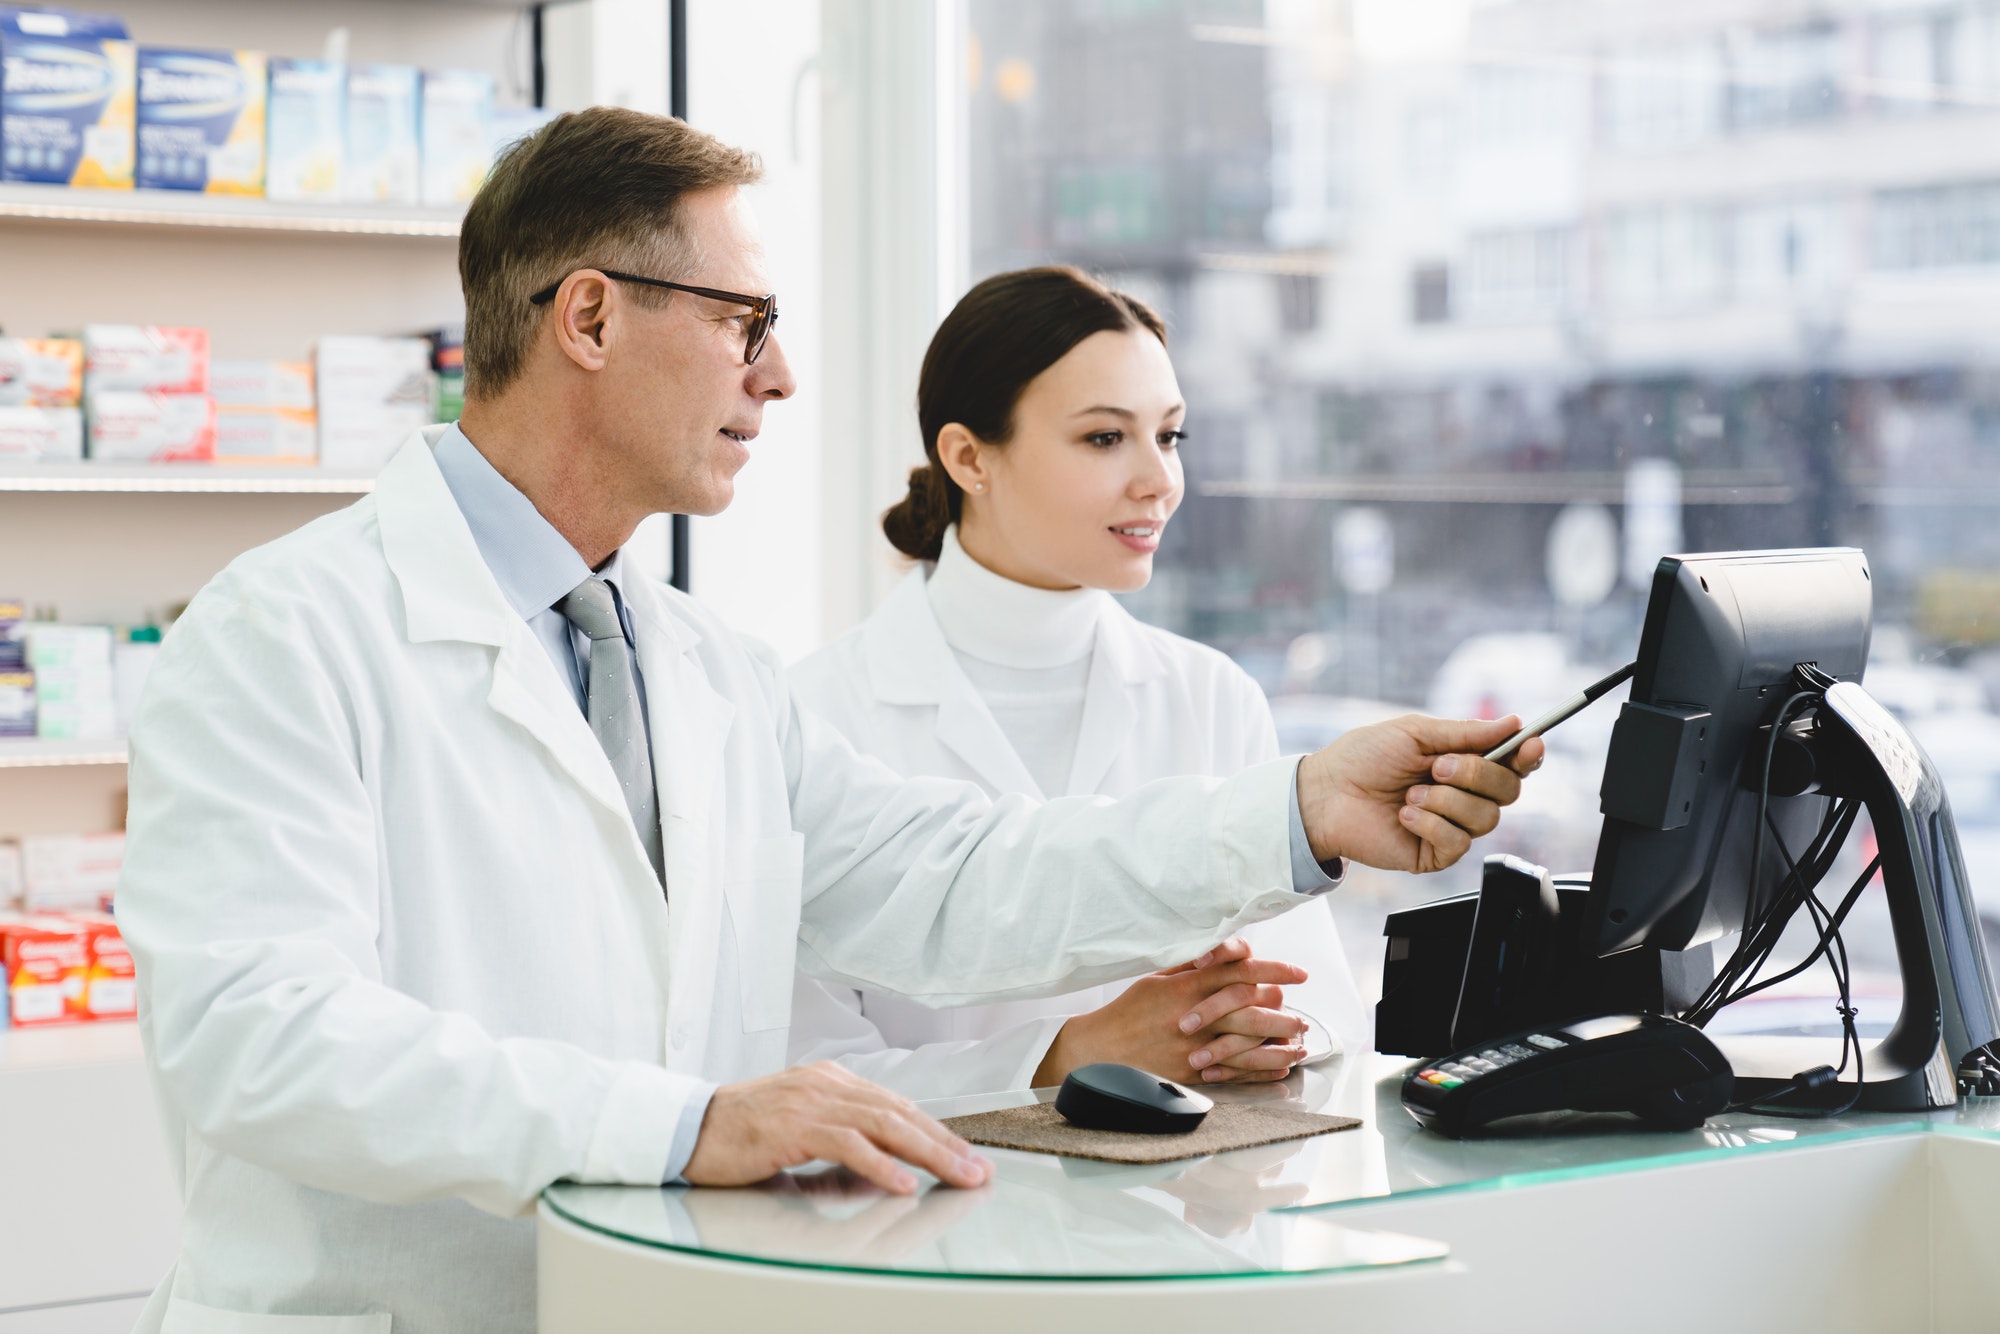 pharmacist-pointing-showing-male-colleague-medication-prices-prescriptions-on-computer-screen.jpg